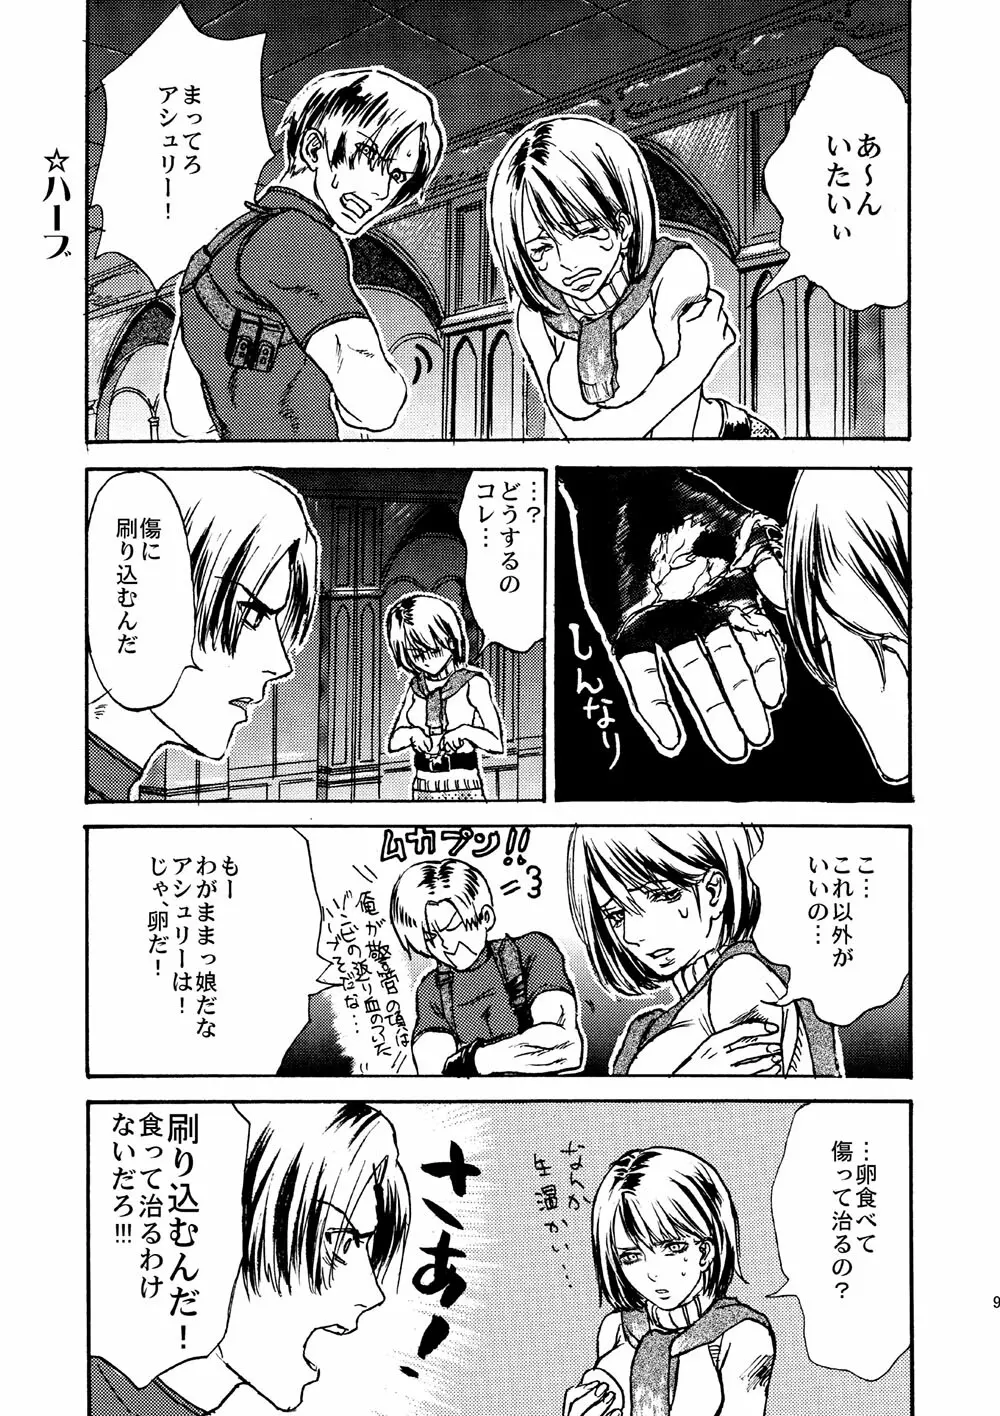 VILLAGE OF FEAR/バイオ４同人誌ｗｅｂ再録 Page.6